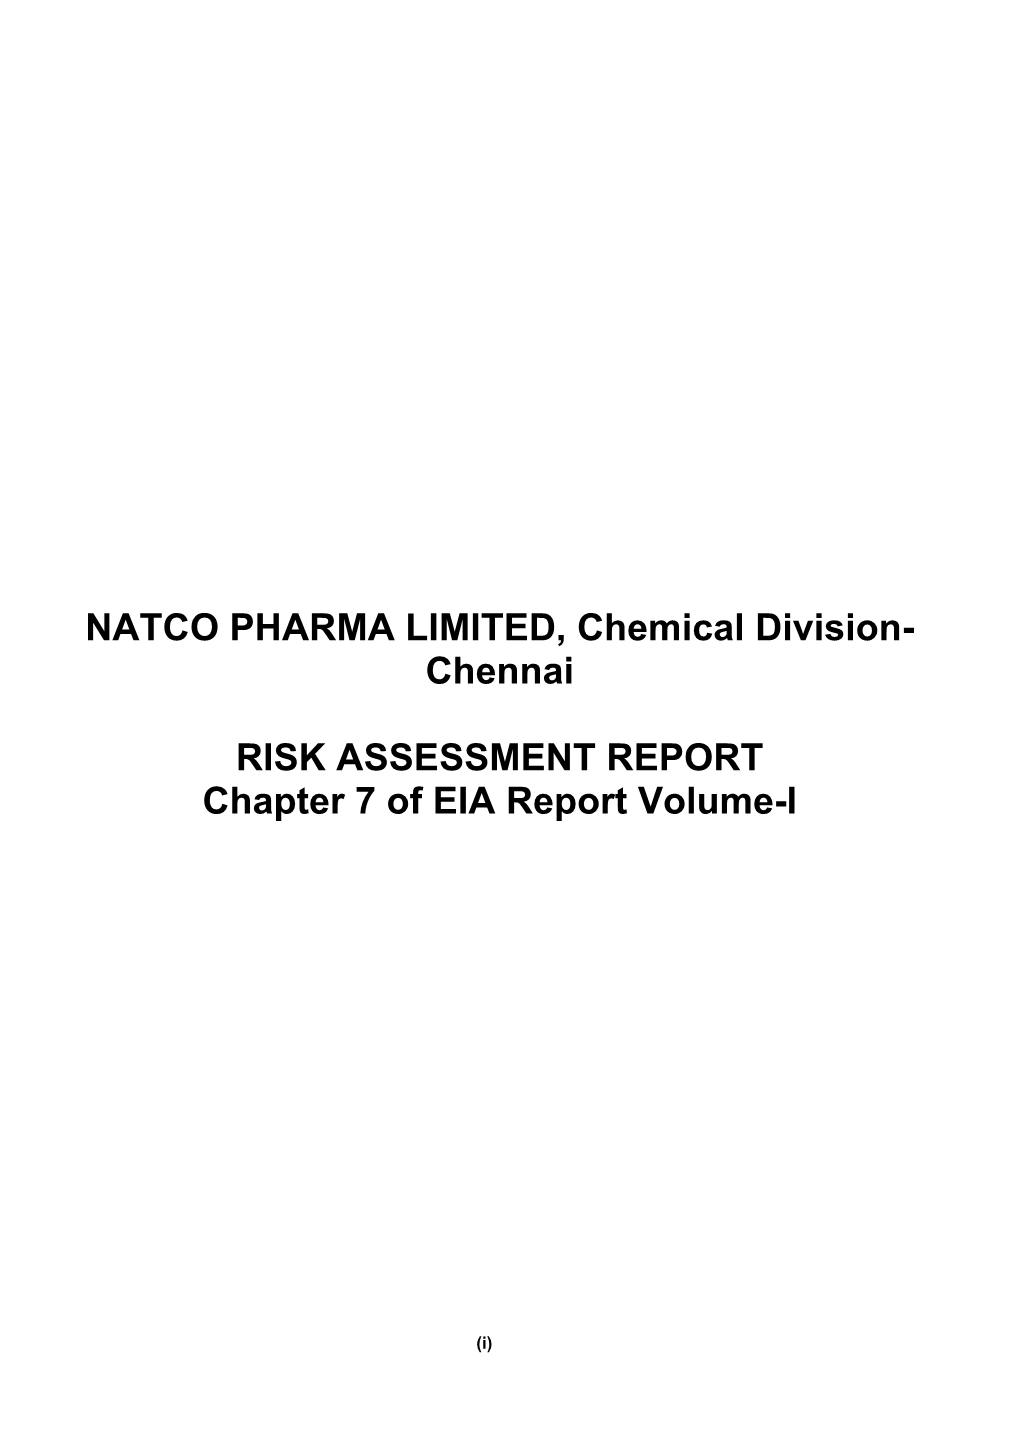 Chennai RISK ASSESSMENT REPORT Chapter 7 of EIA Report